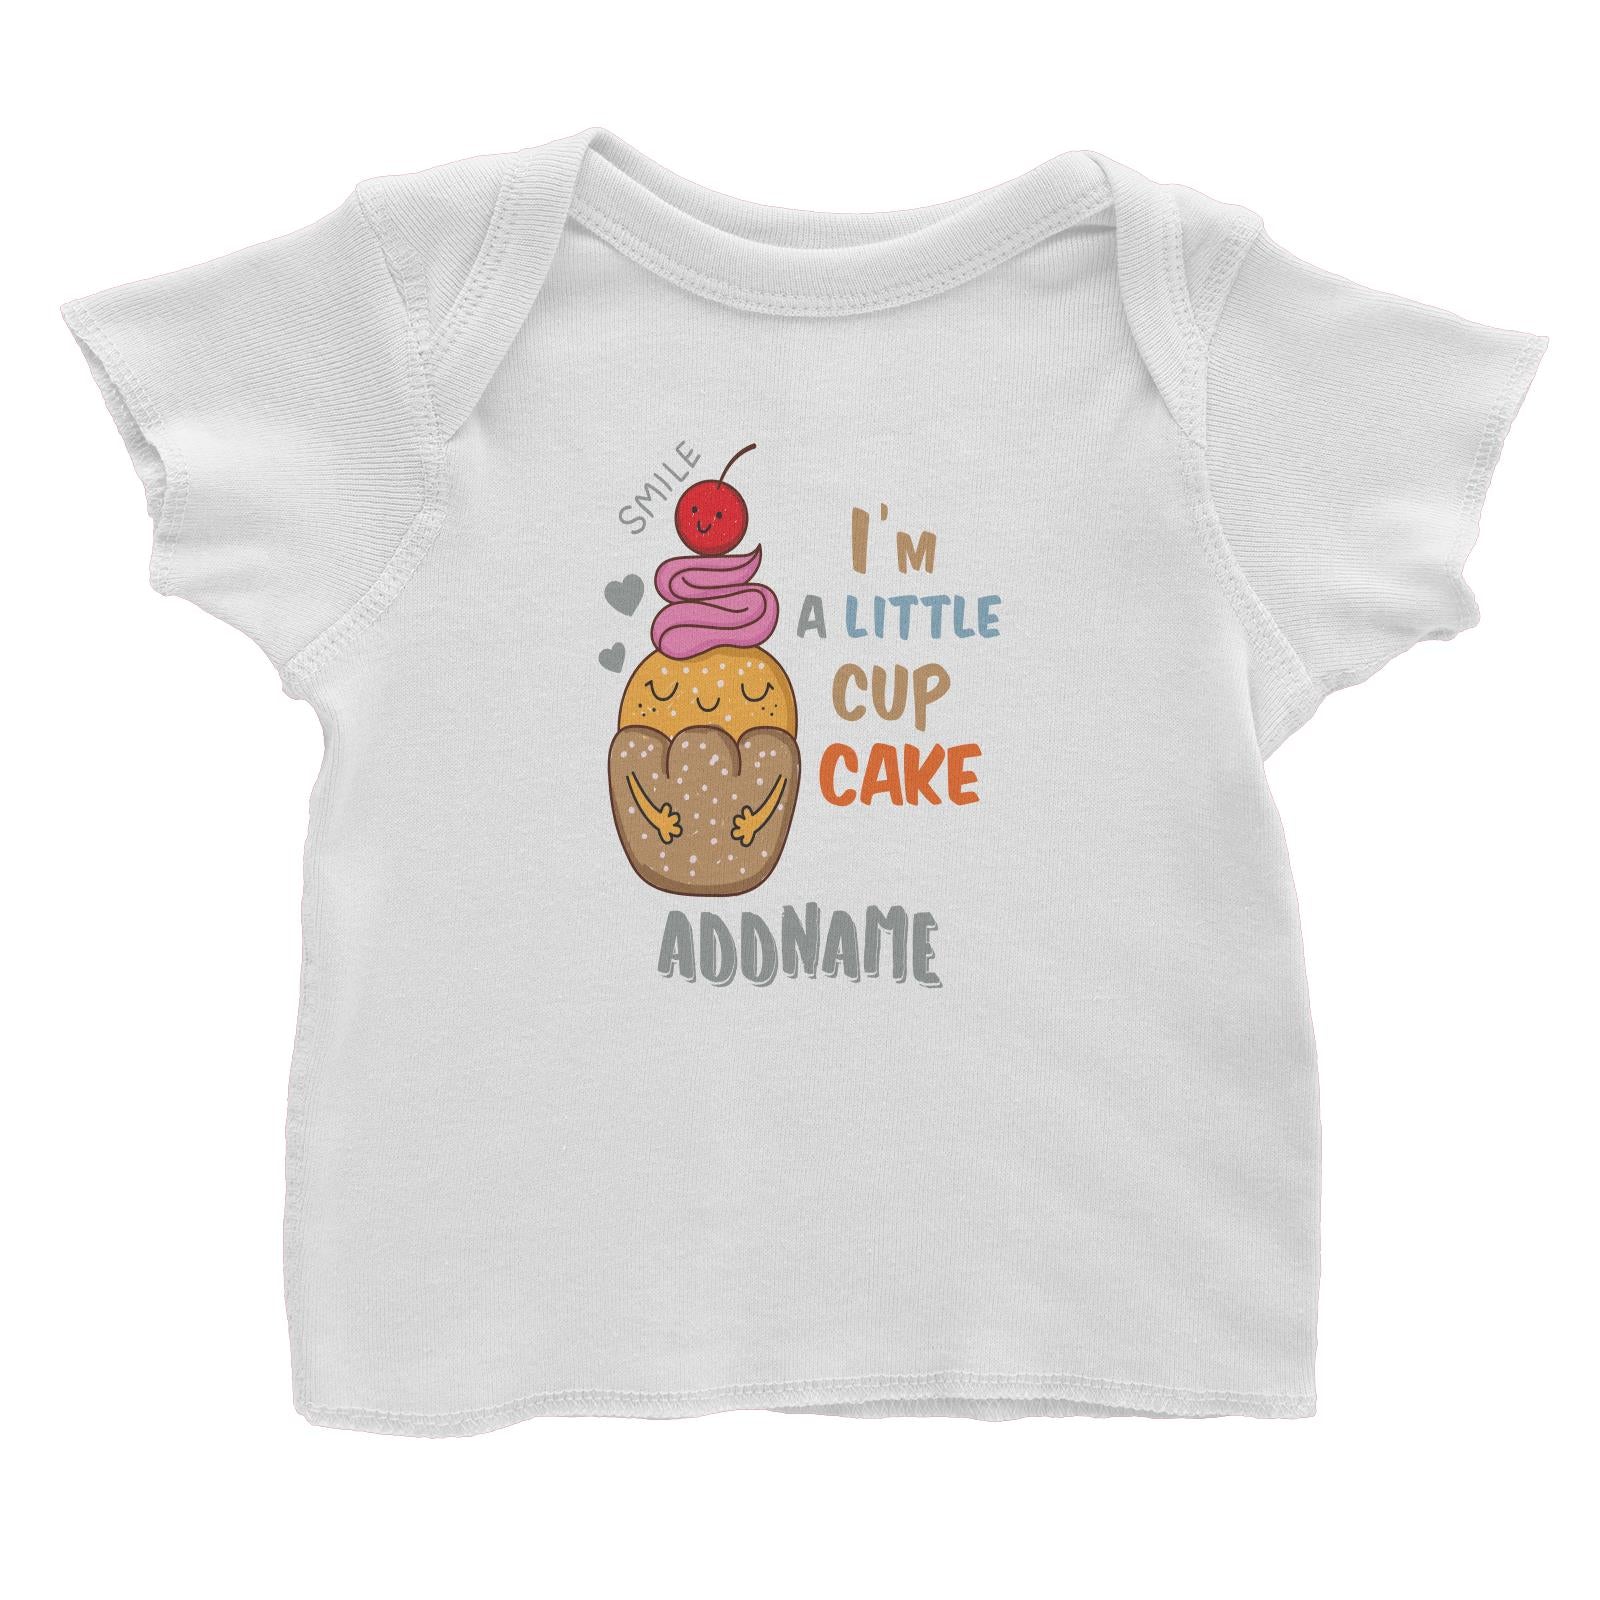 Cool Cute Foods I'm A Little Cup Cake Addname Baby T-Shirt